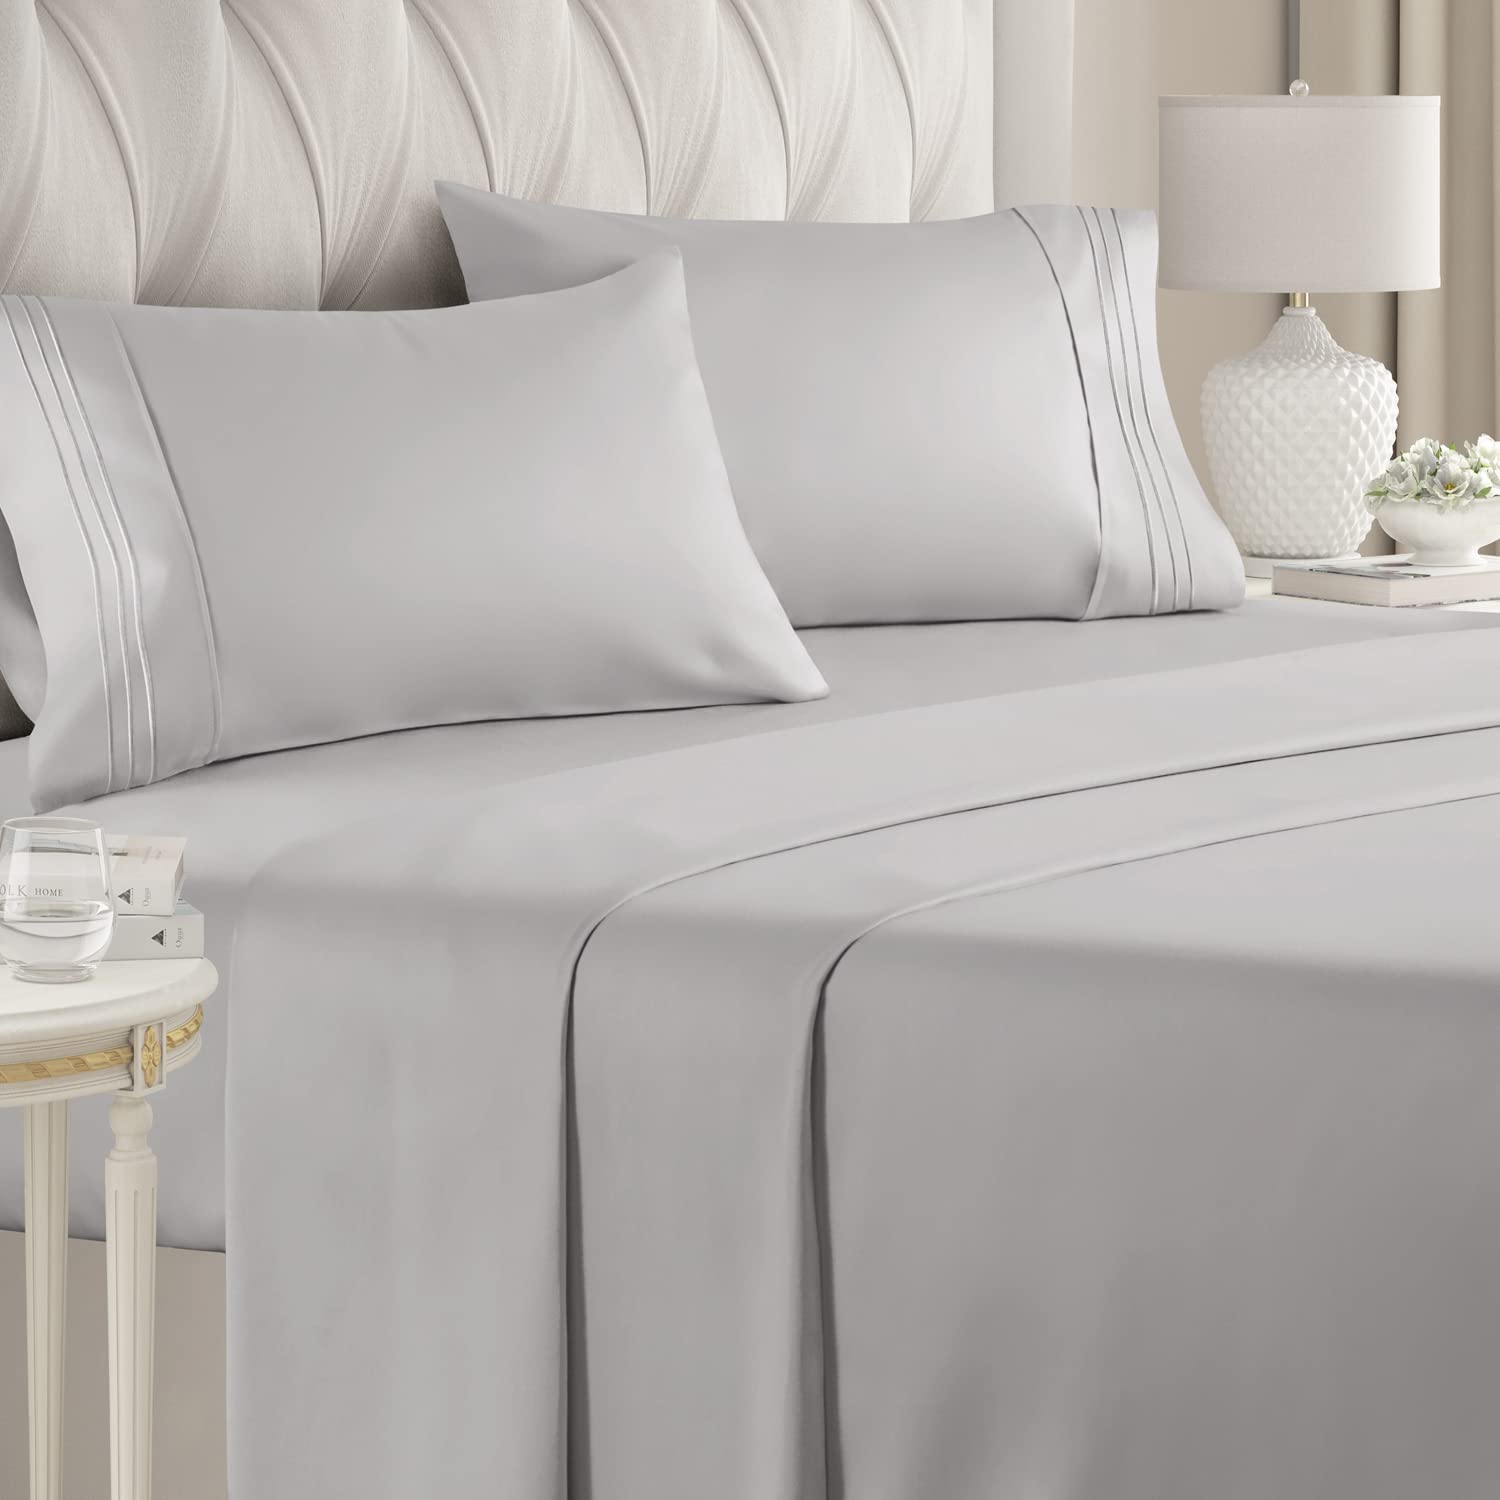 Queen Size Sheet Set - Breathable & Cooling Sheets - Softer than Jersey Cotton - Same Look as Jersey Knit Sheets & T-Shirt Sheets - Deep Pockets - 4 Piece Set - Wrinkle Free - Heathered Tan – 4PC